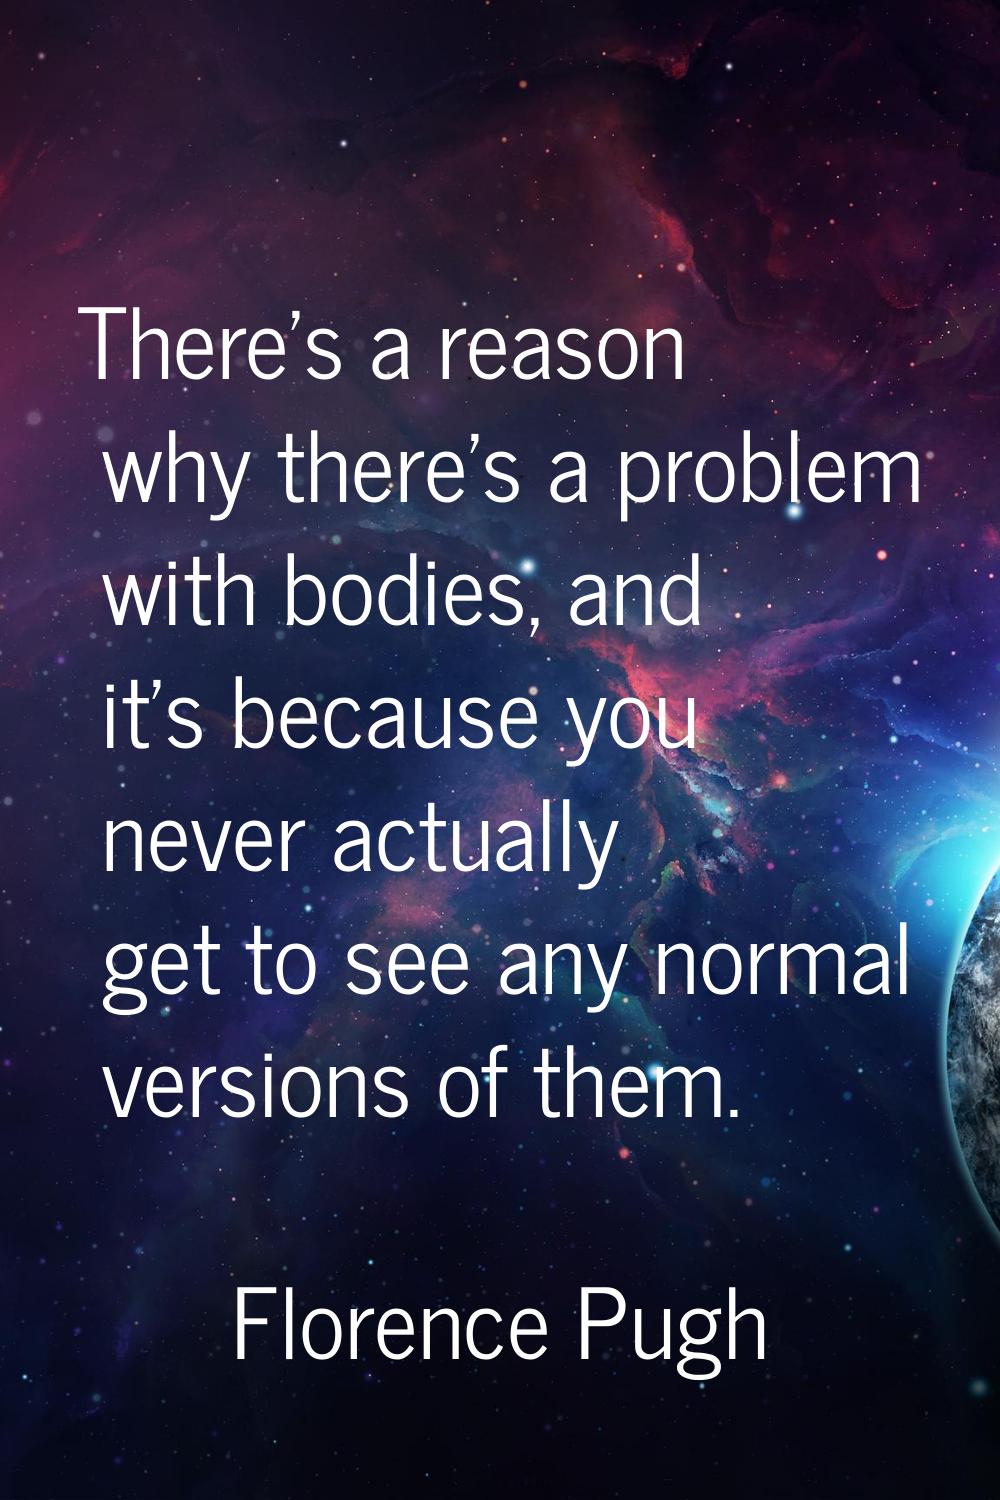 There's a reason why there's a problem with bodies, and it's because you never actually get to see 